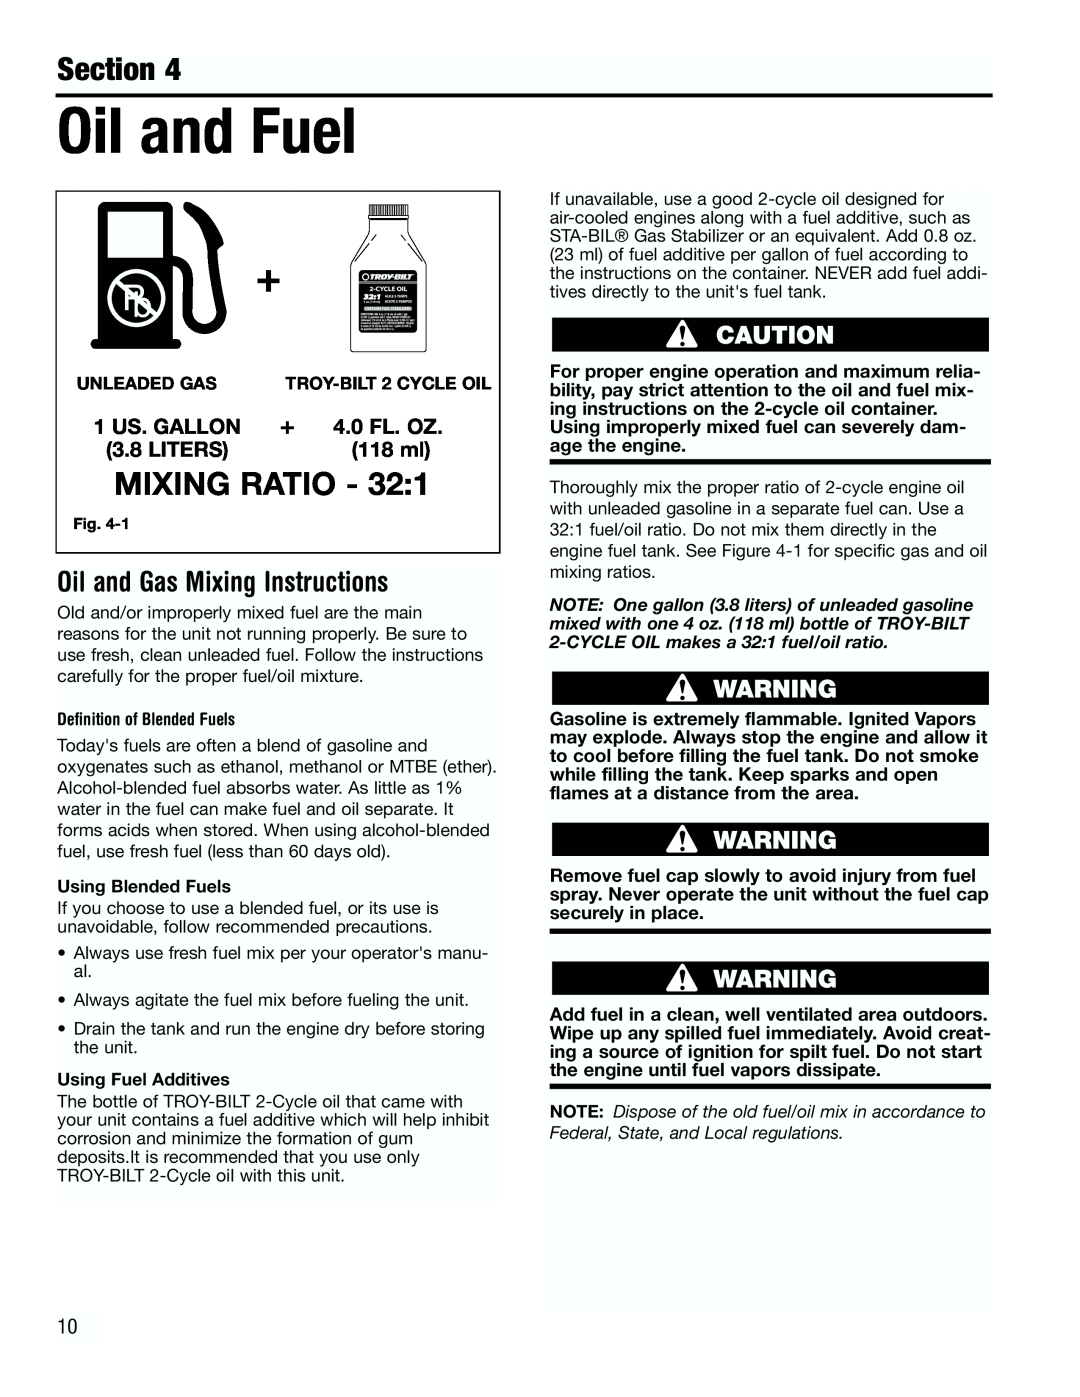 Troy-Bilt TB3000 Oil and Fuel, Mixing Ratio, Oil and Gas Mixing Instructions, Section, 1 US. GALLON, + 4.0 FL. OZ, 118 ml 